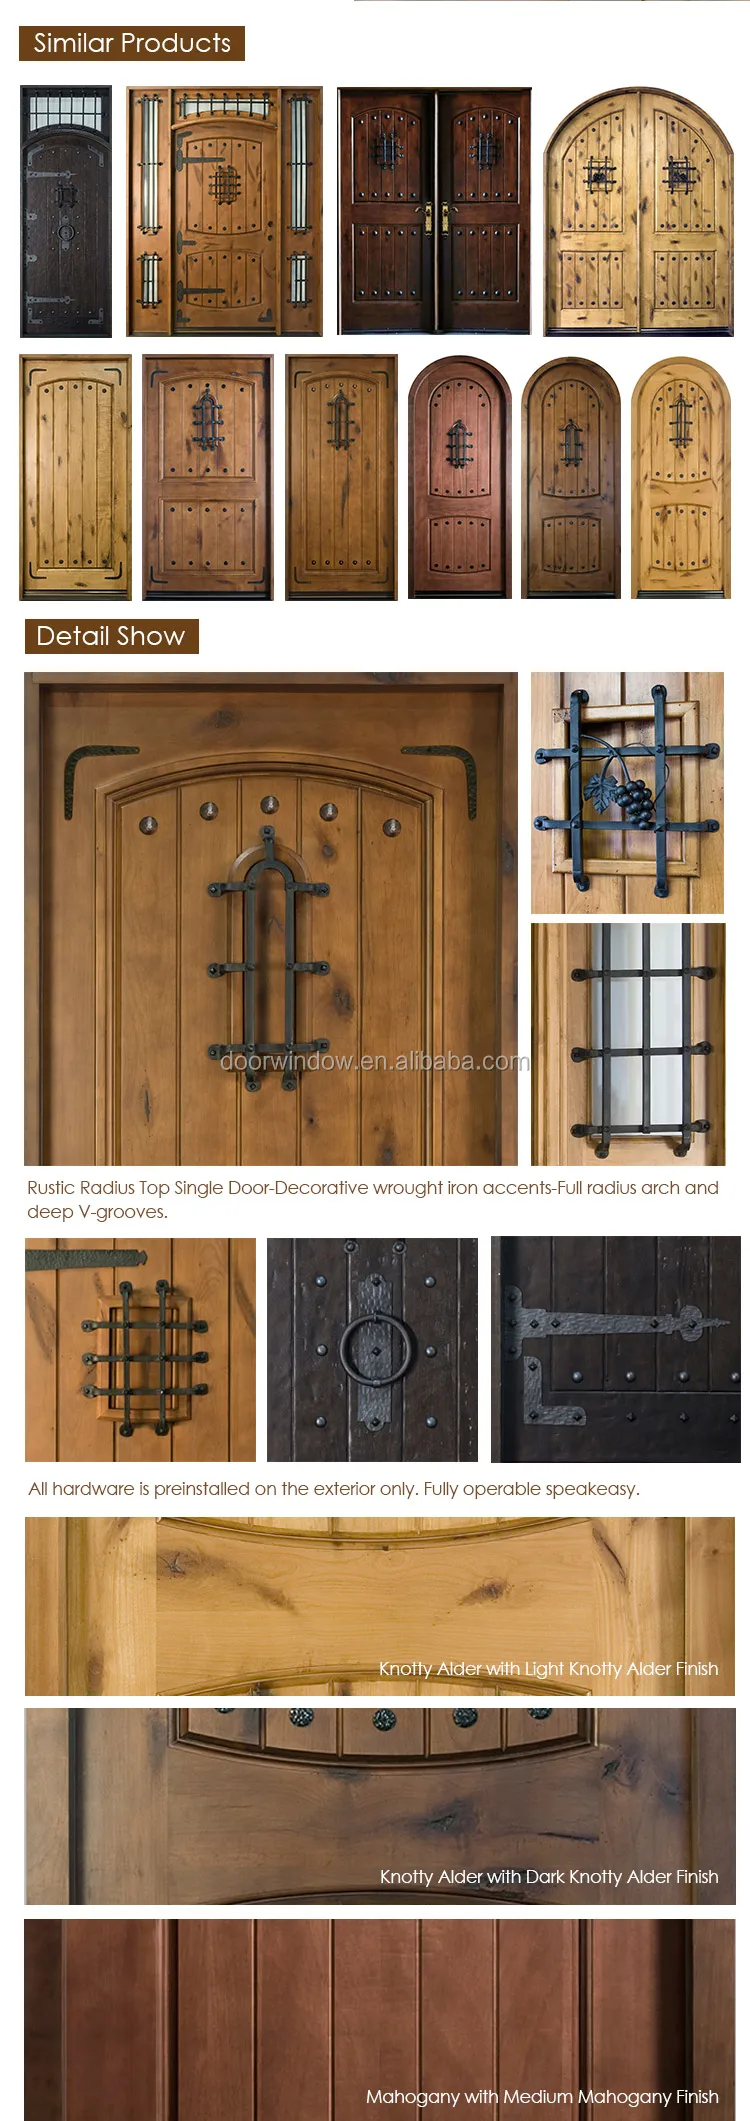 Church gate style design exterior wood front doors with top carving glass entry door with side lite rustic door